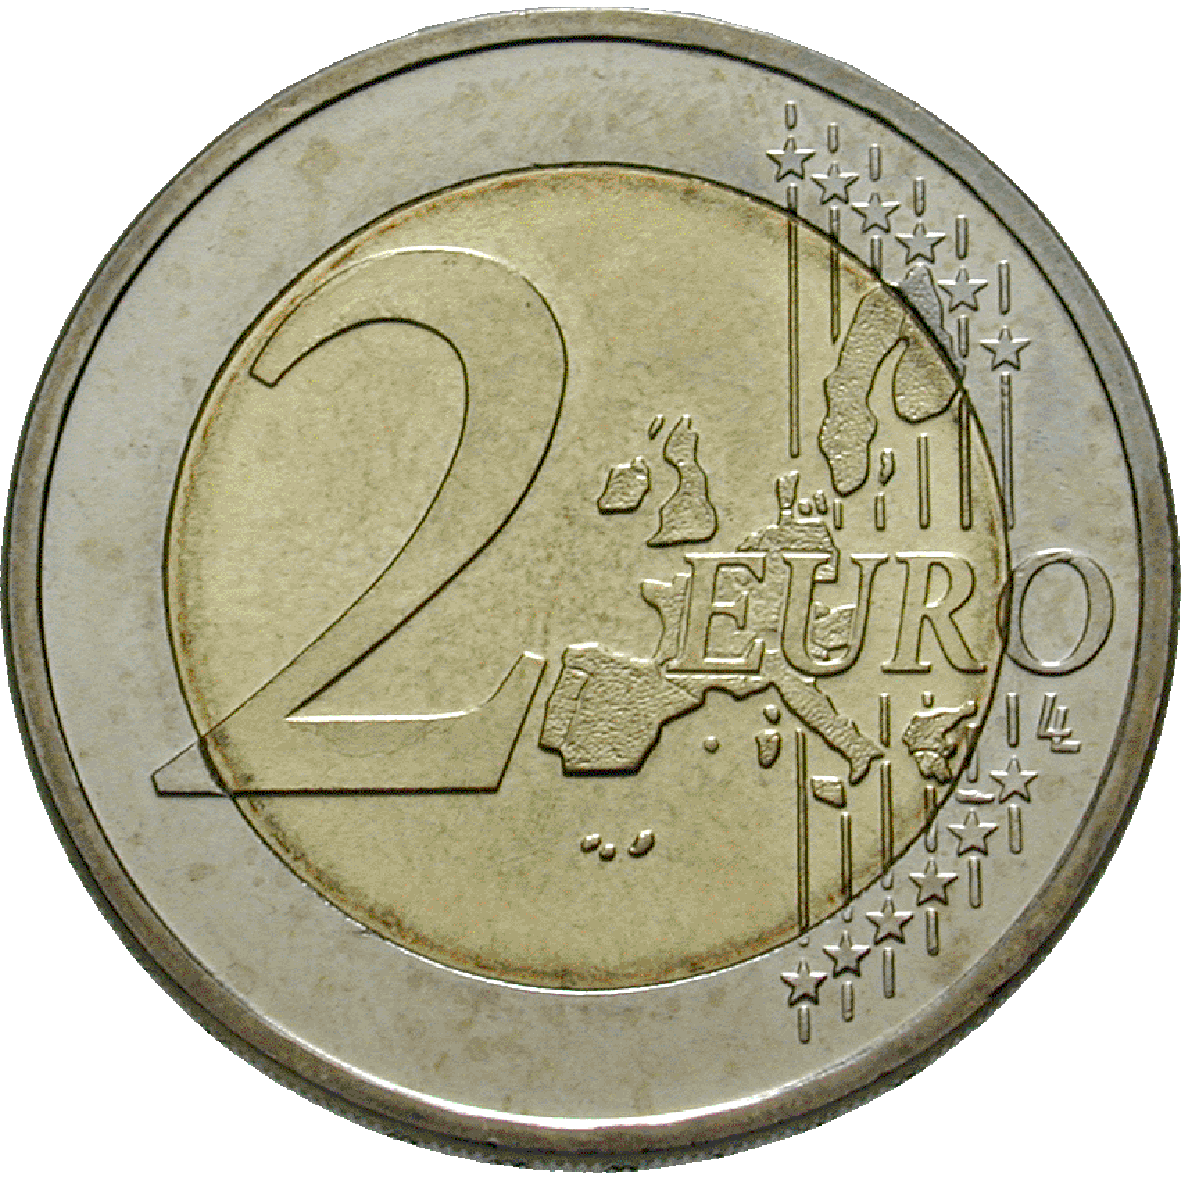 Federal Republic of Germany, 2 Euro 2002 (obverse)